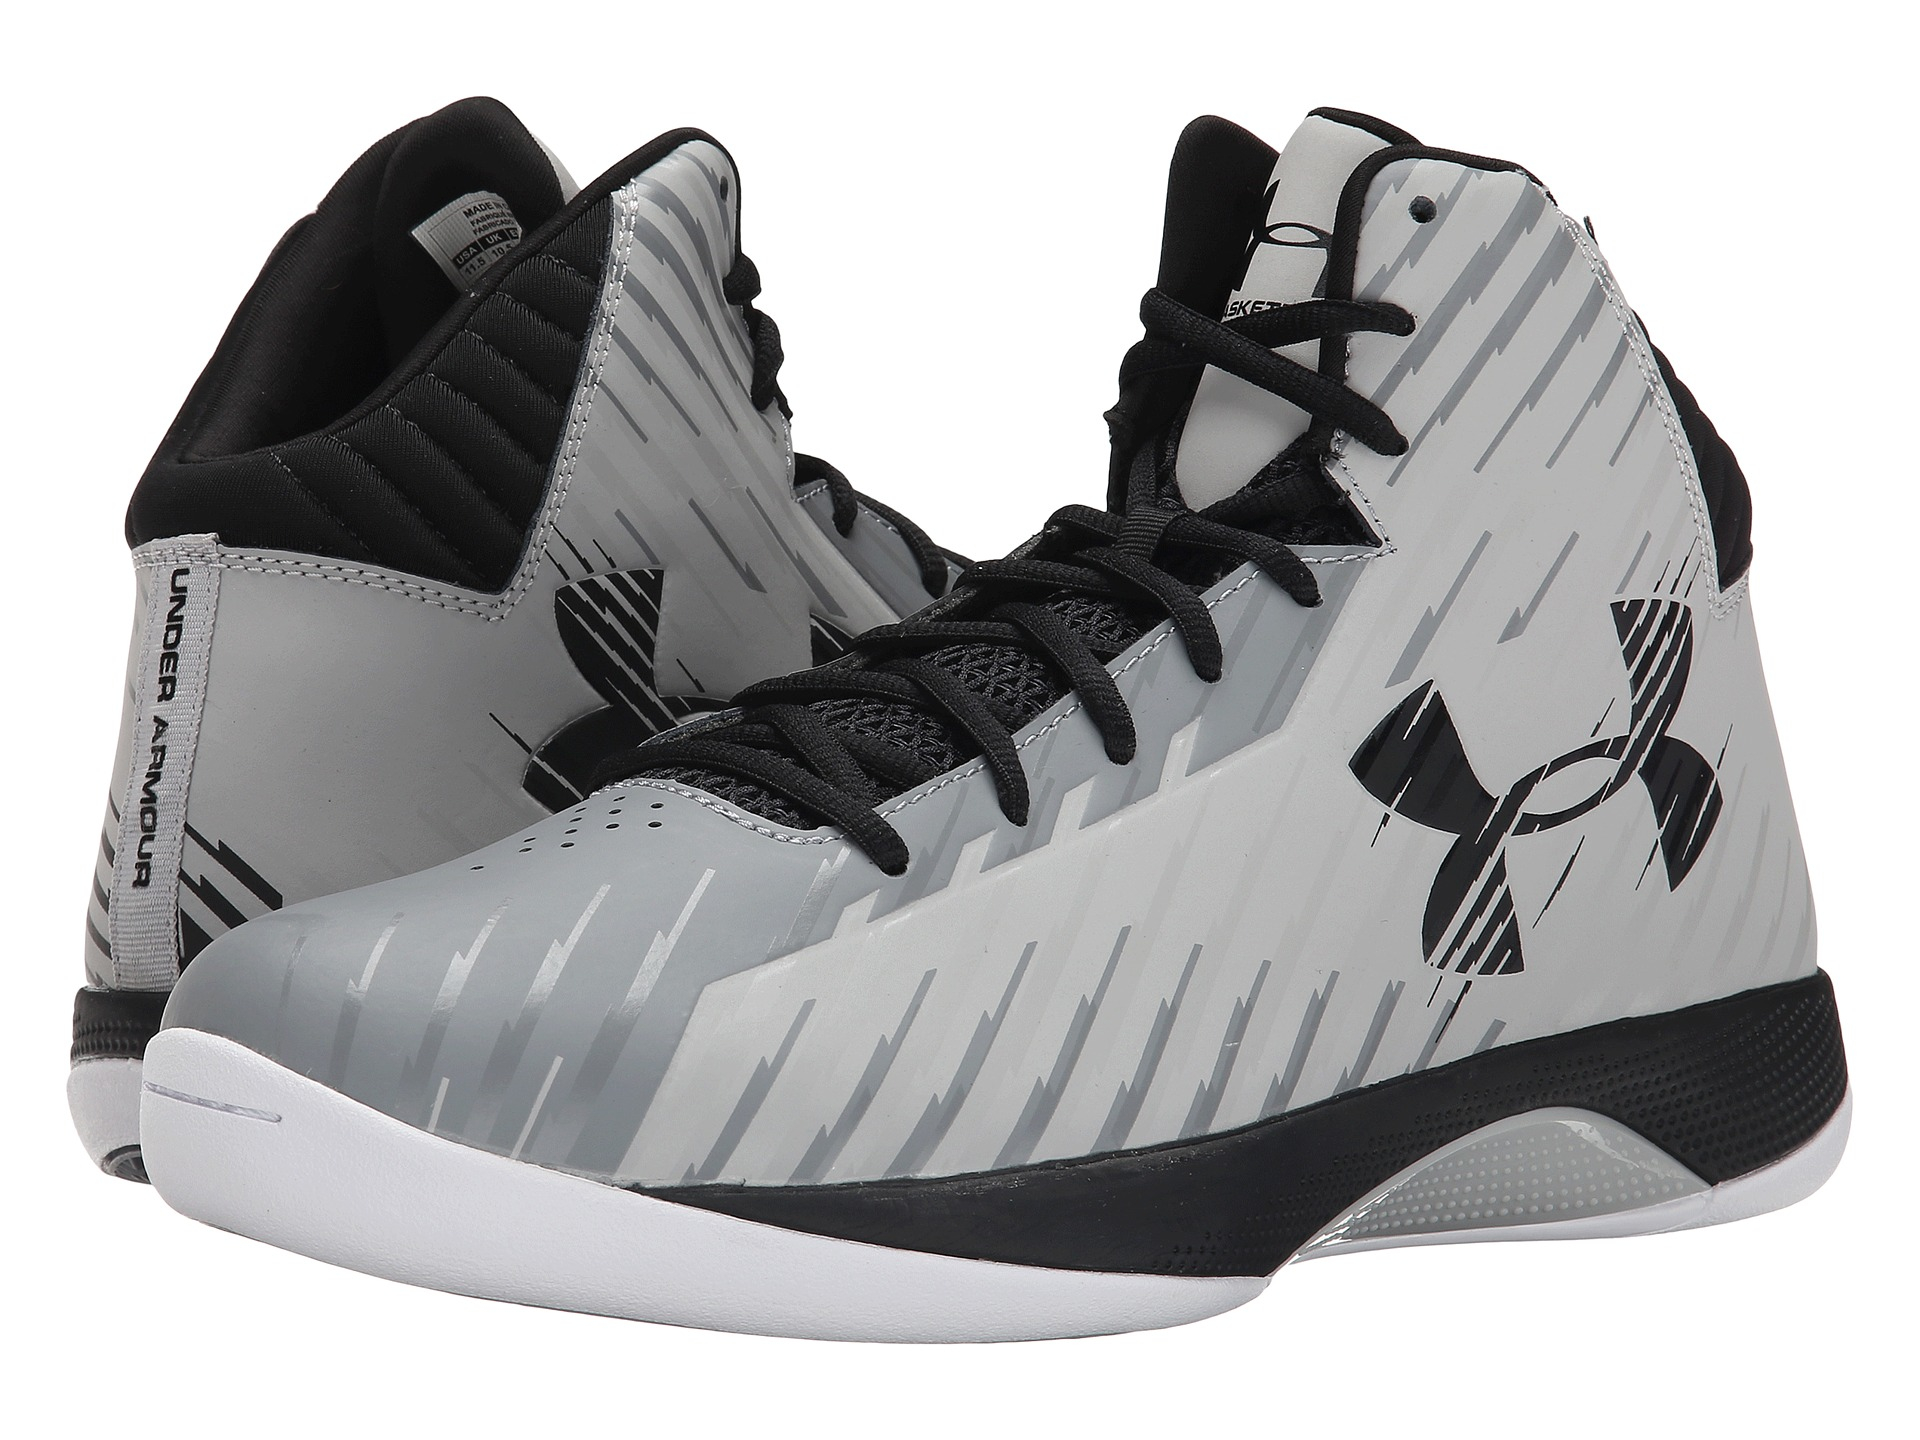 ForOffice | under armour men's ua jet 2 mid basketball shoes